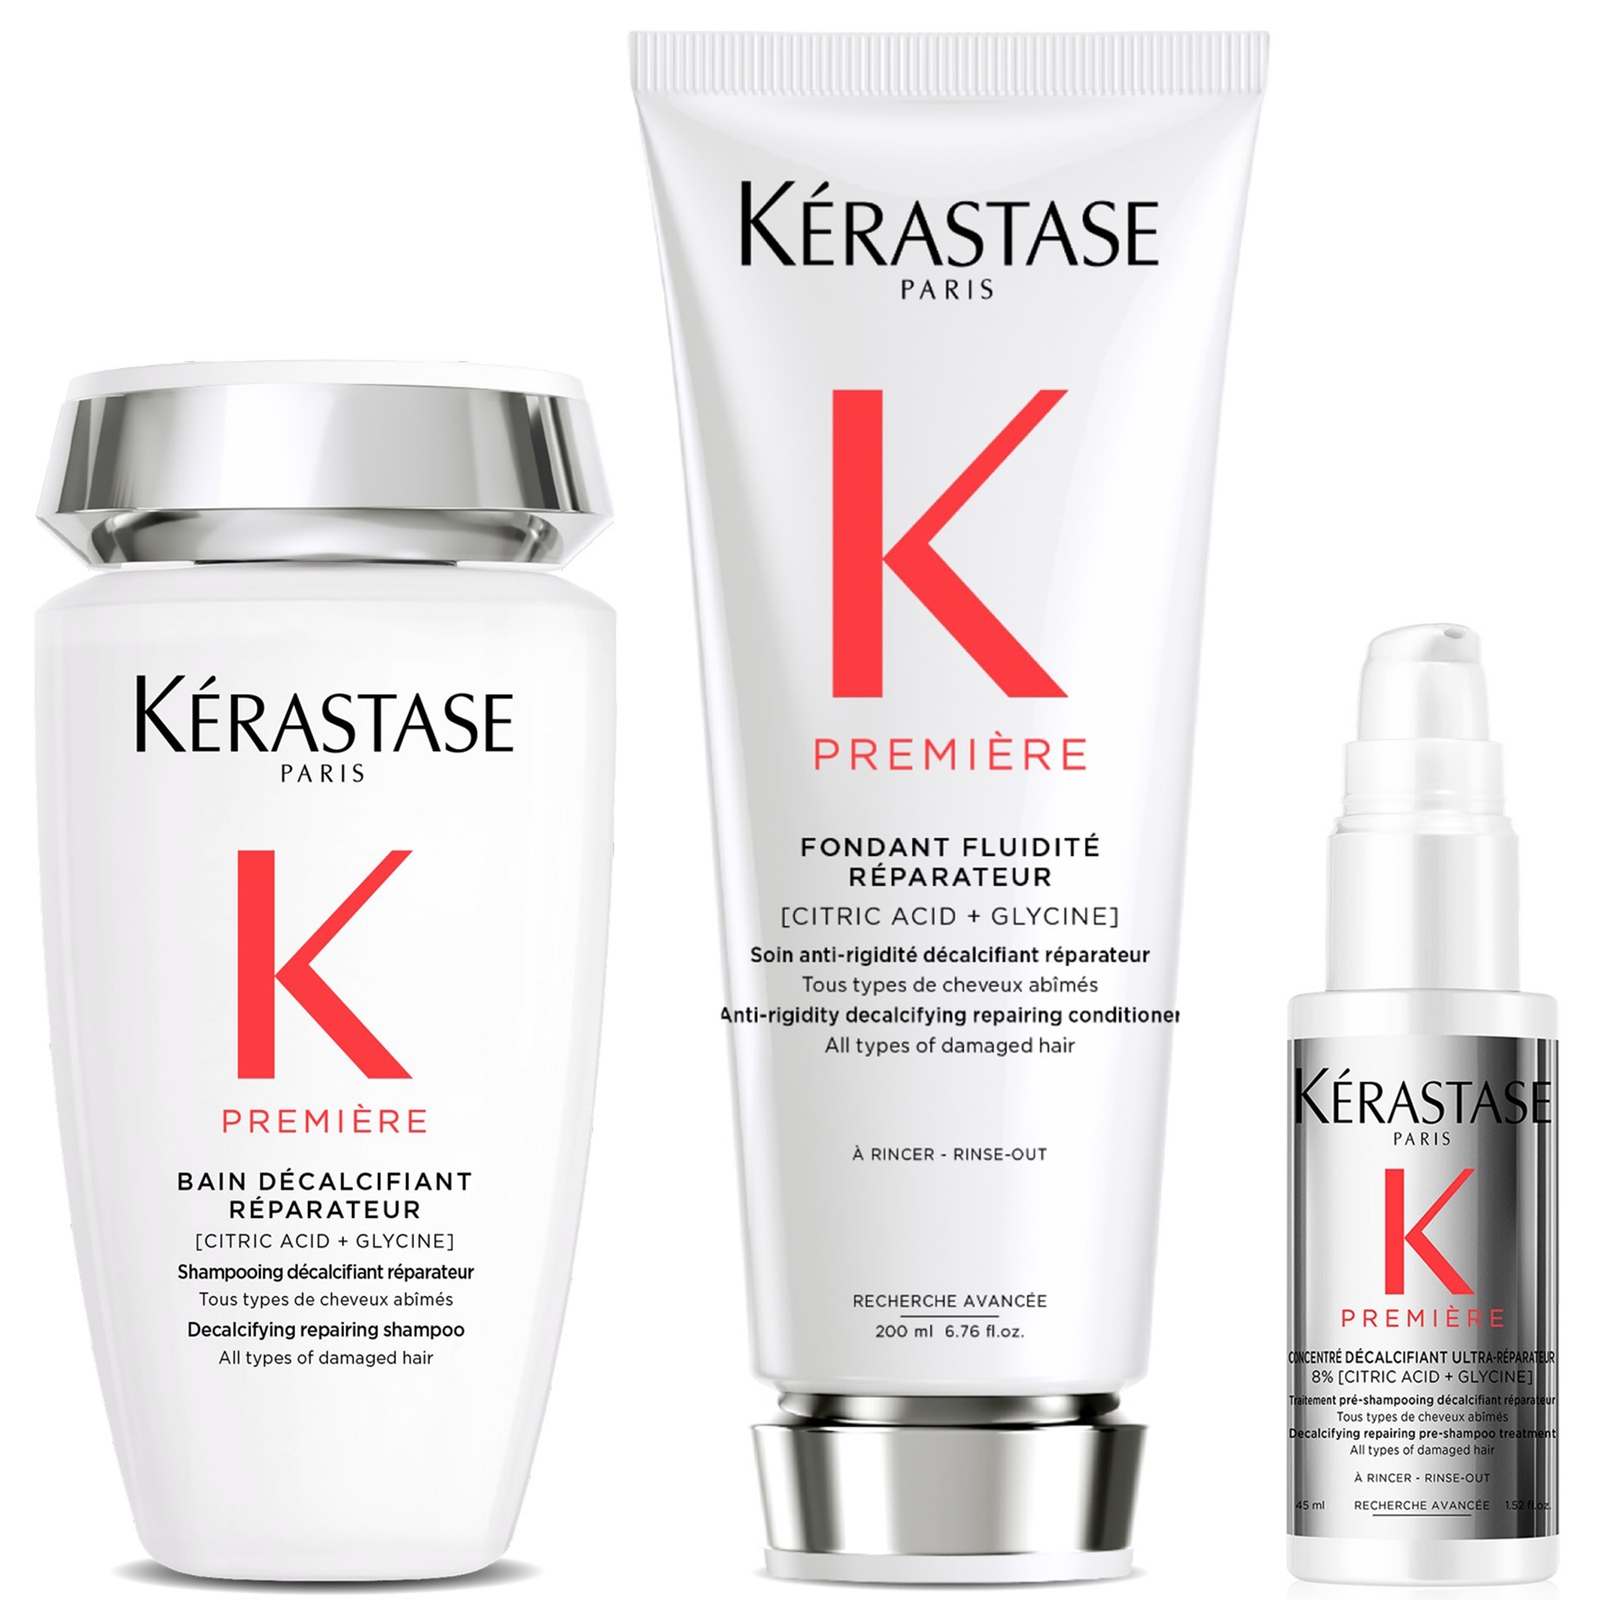 Kérastase Première Decalcifying Shampoo and Conditioner Duo with Travel Size Pre-Shampoo for Damaged Hair